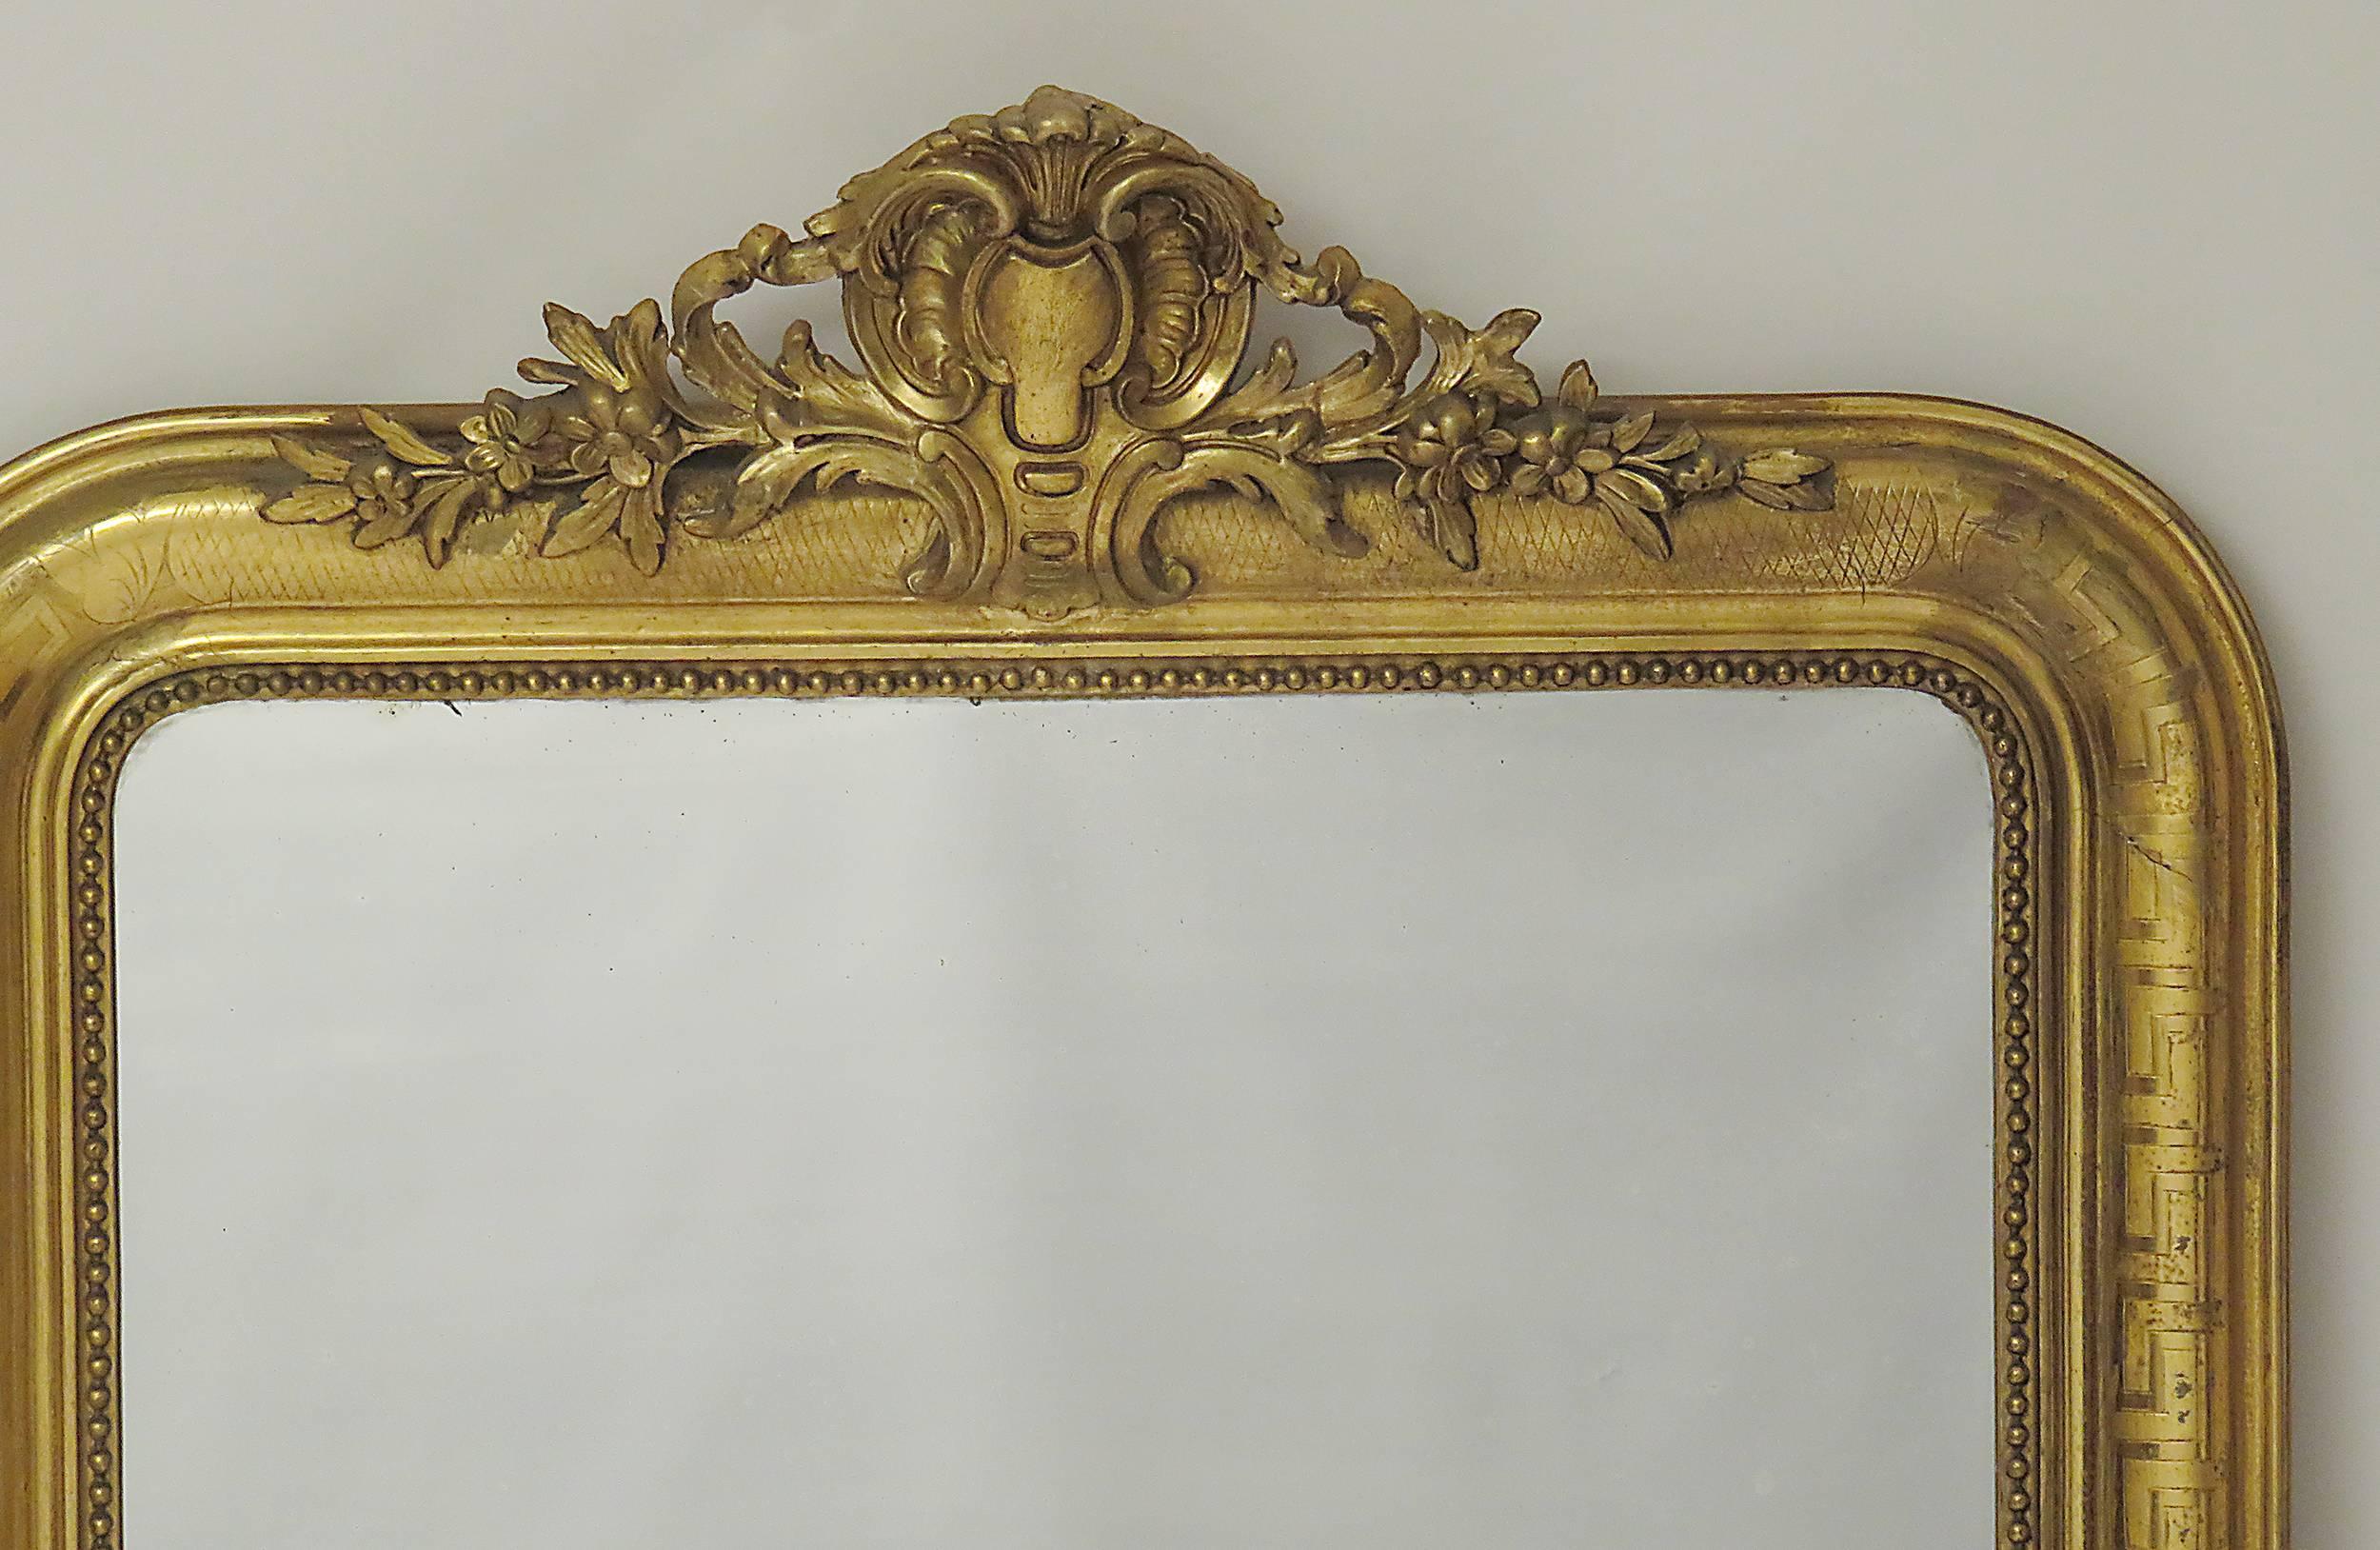 A well proportioned and large giltwood mirror made during the reign of Louis Philippe, France, circa 1845. This mirror is particularly good because the burnished and matte gilding are original as is the mirror plate.